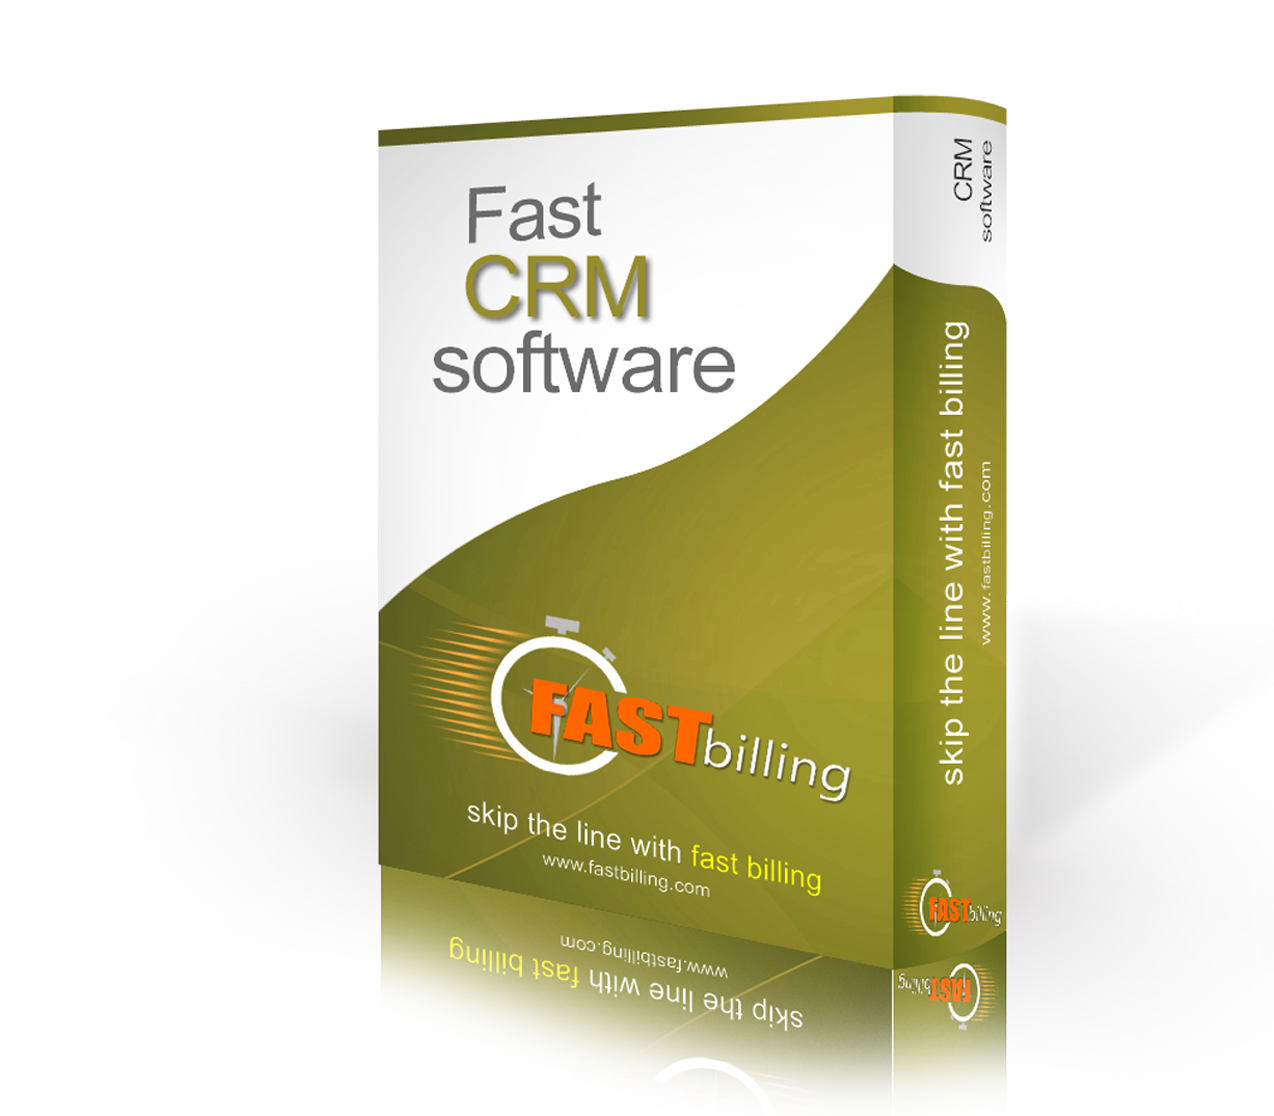 Fast CRM software